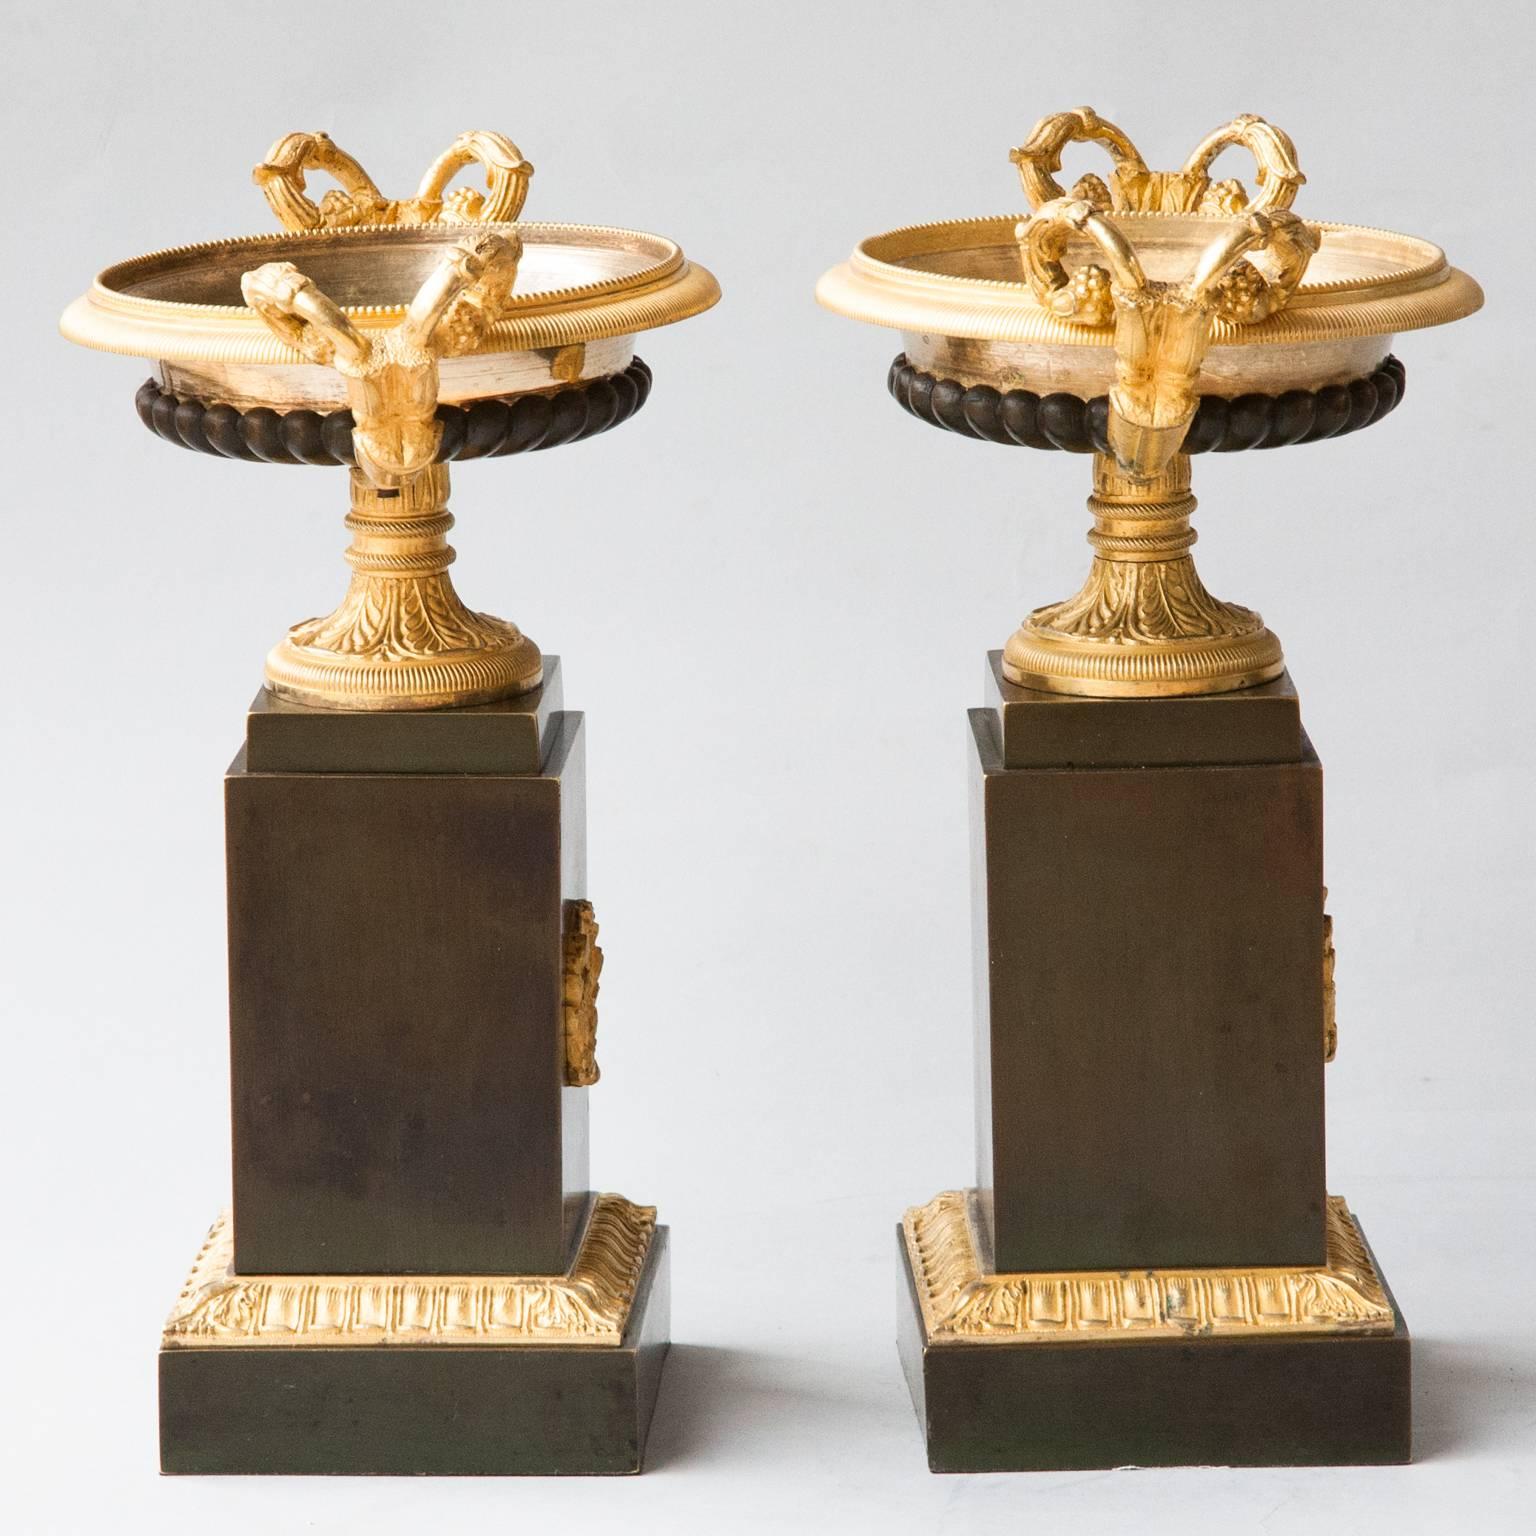 Pair of Restauration Period Gilt and Patinated Bronze Tazza Urns In Excellent Condition For Sale In London, GB